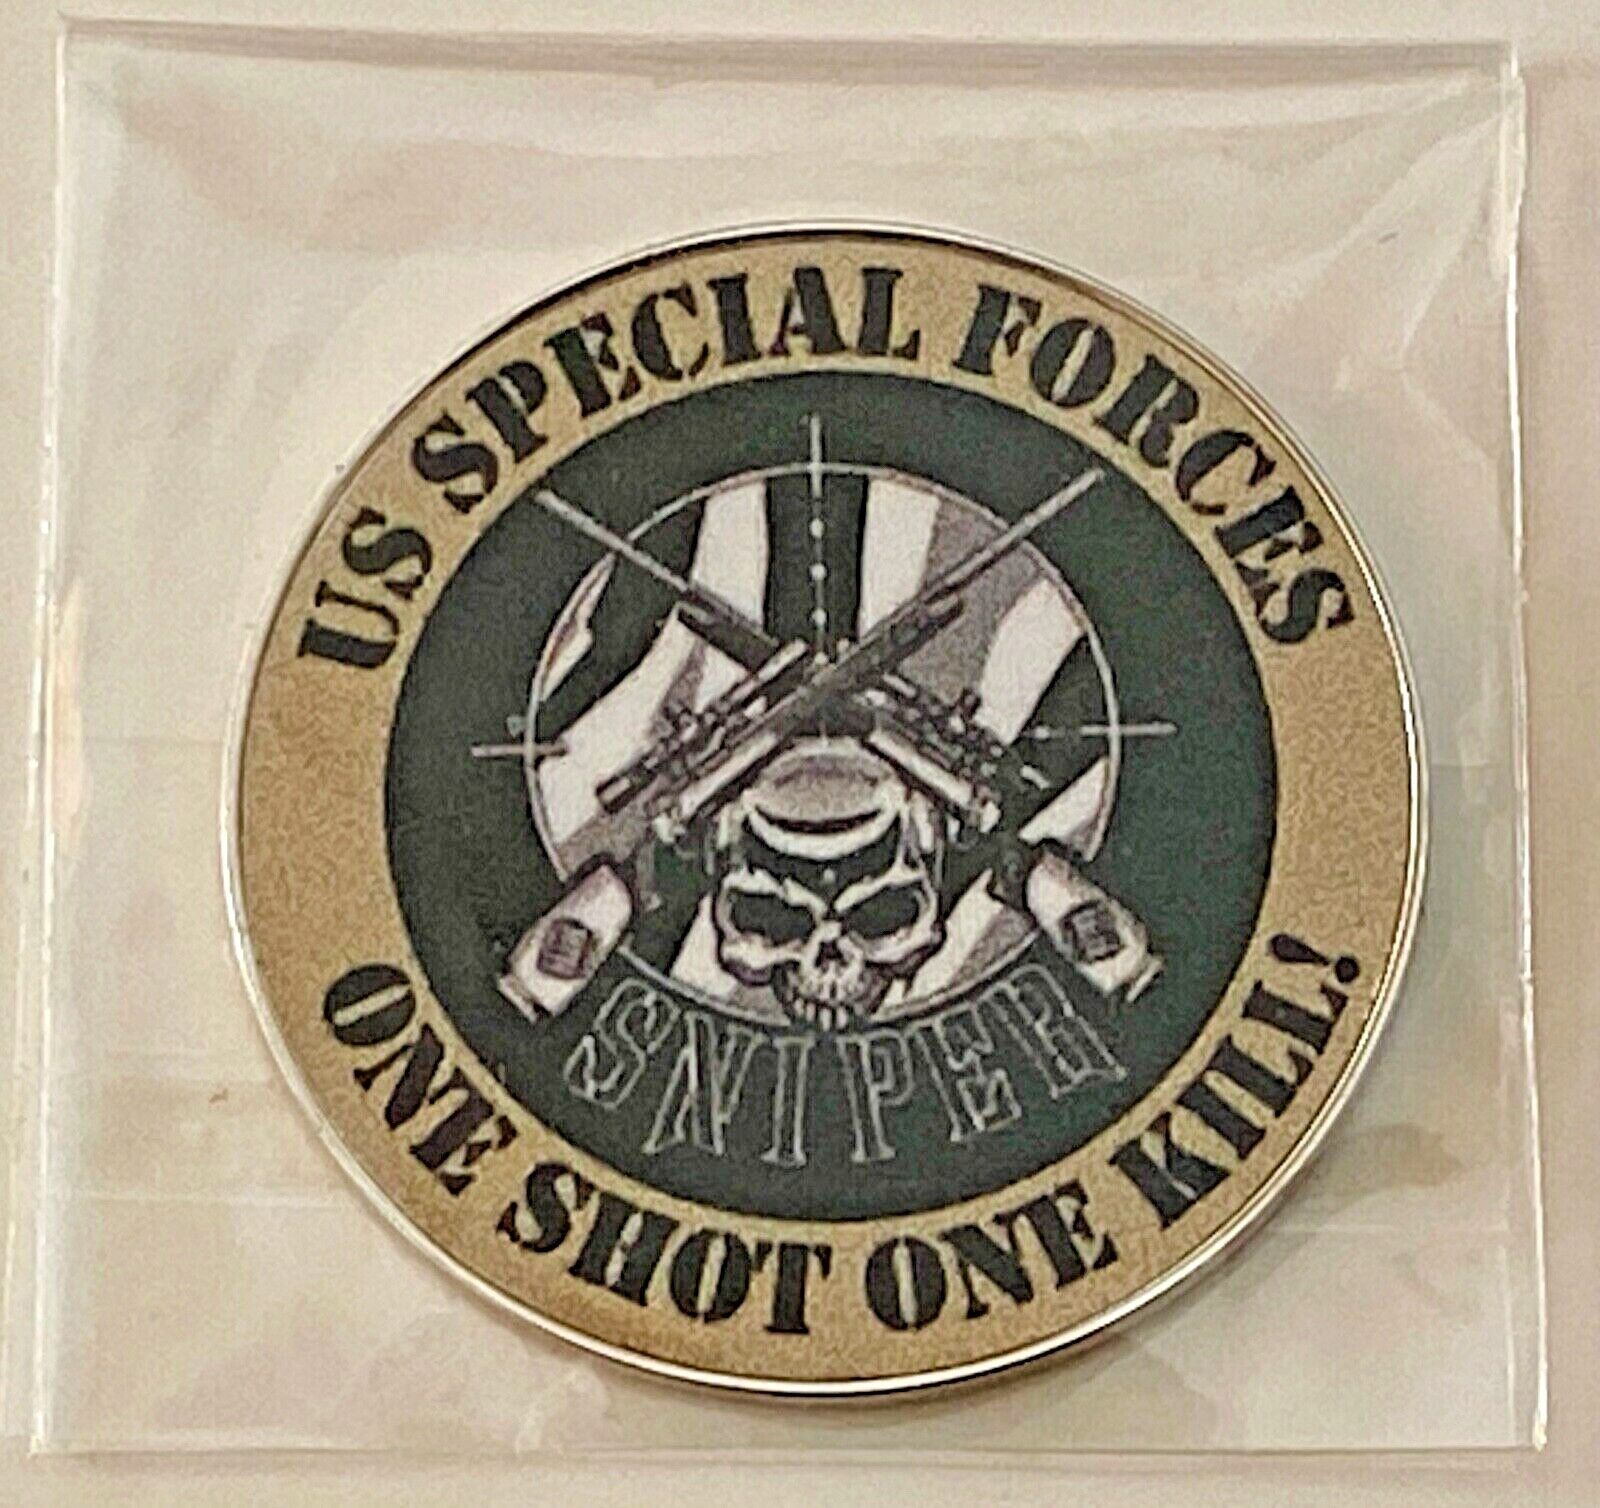 Special Forces - One Shot One Kill - NEW Pro size 32mm Slim - Golf Ball Marker